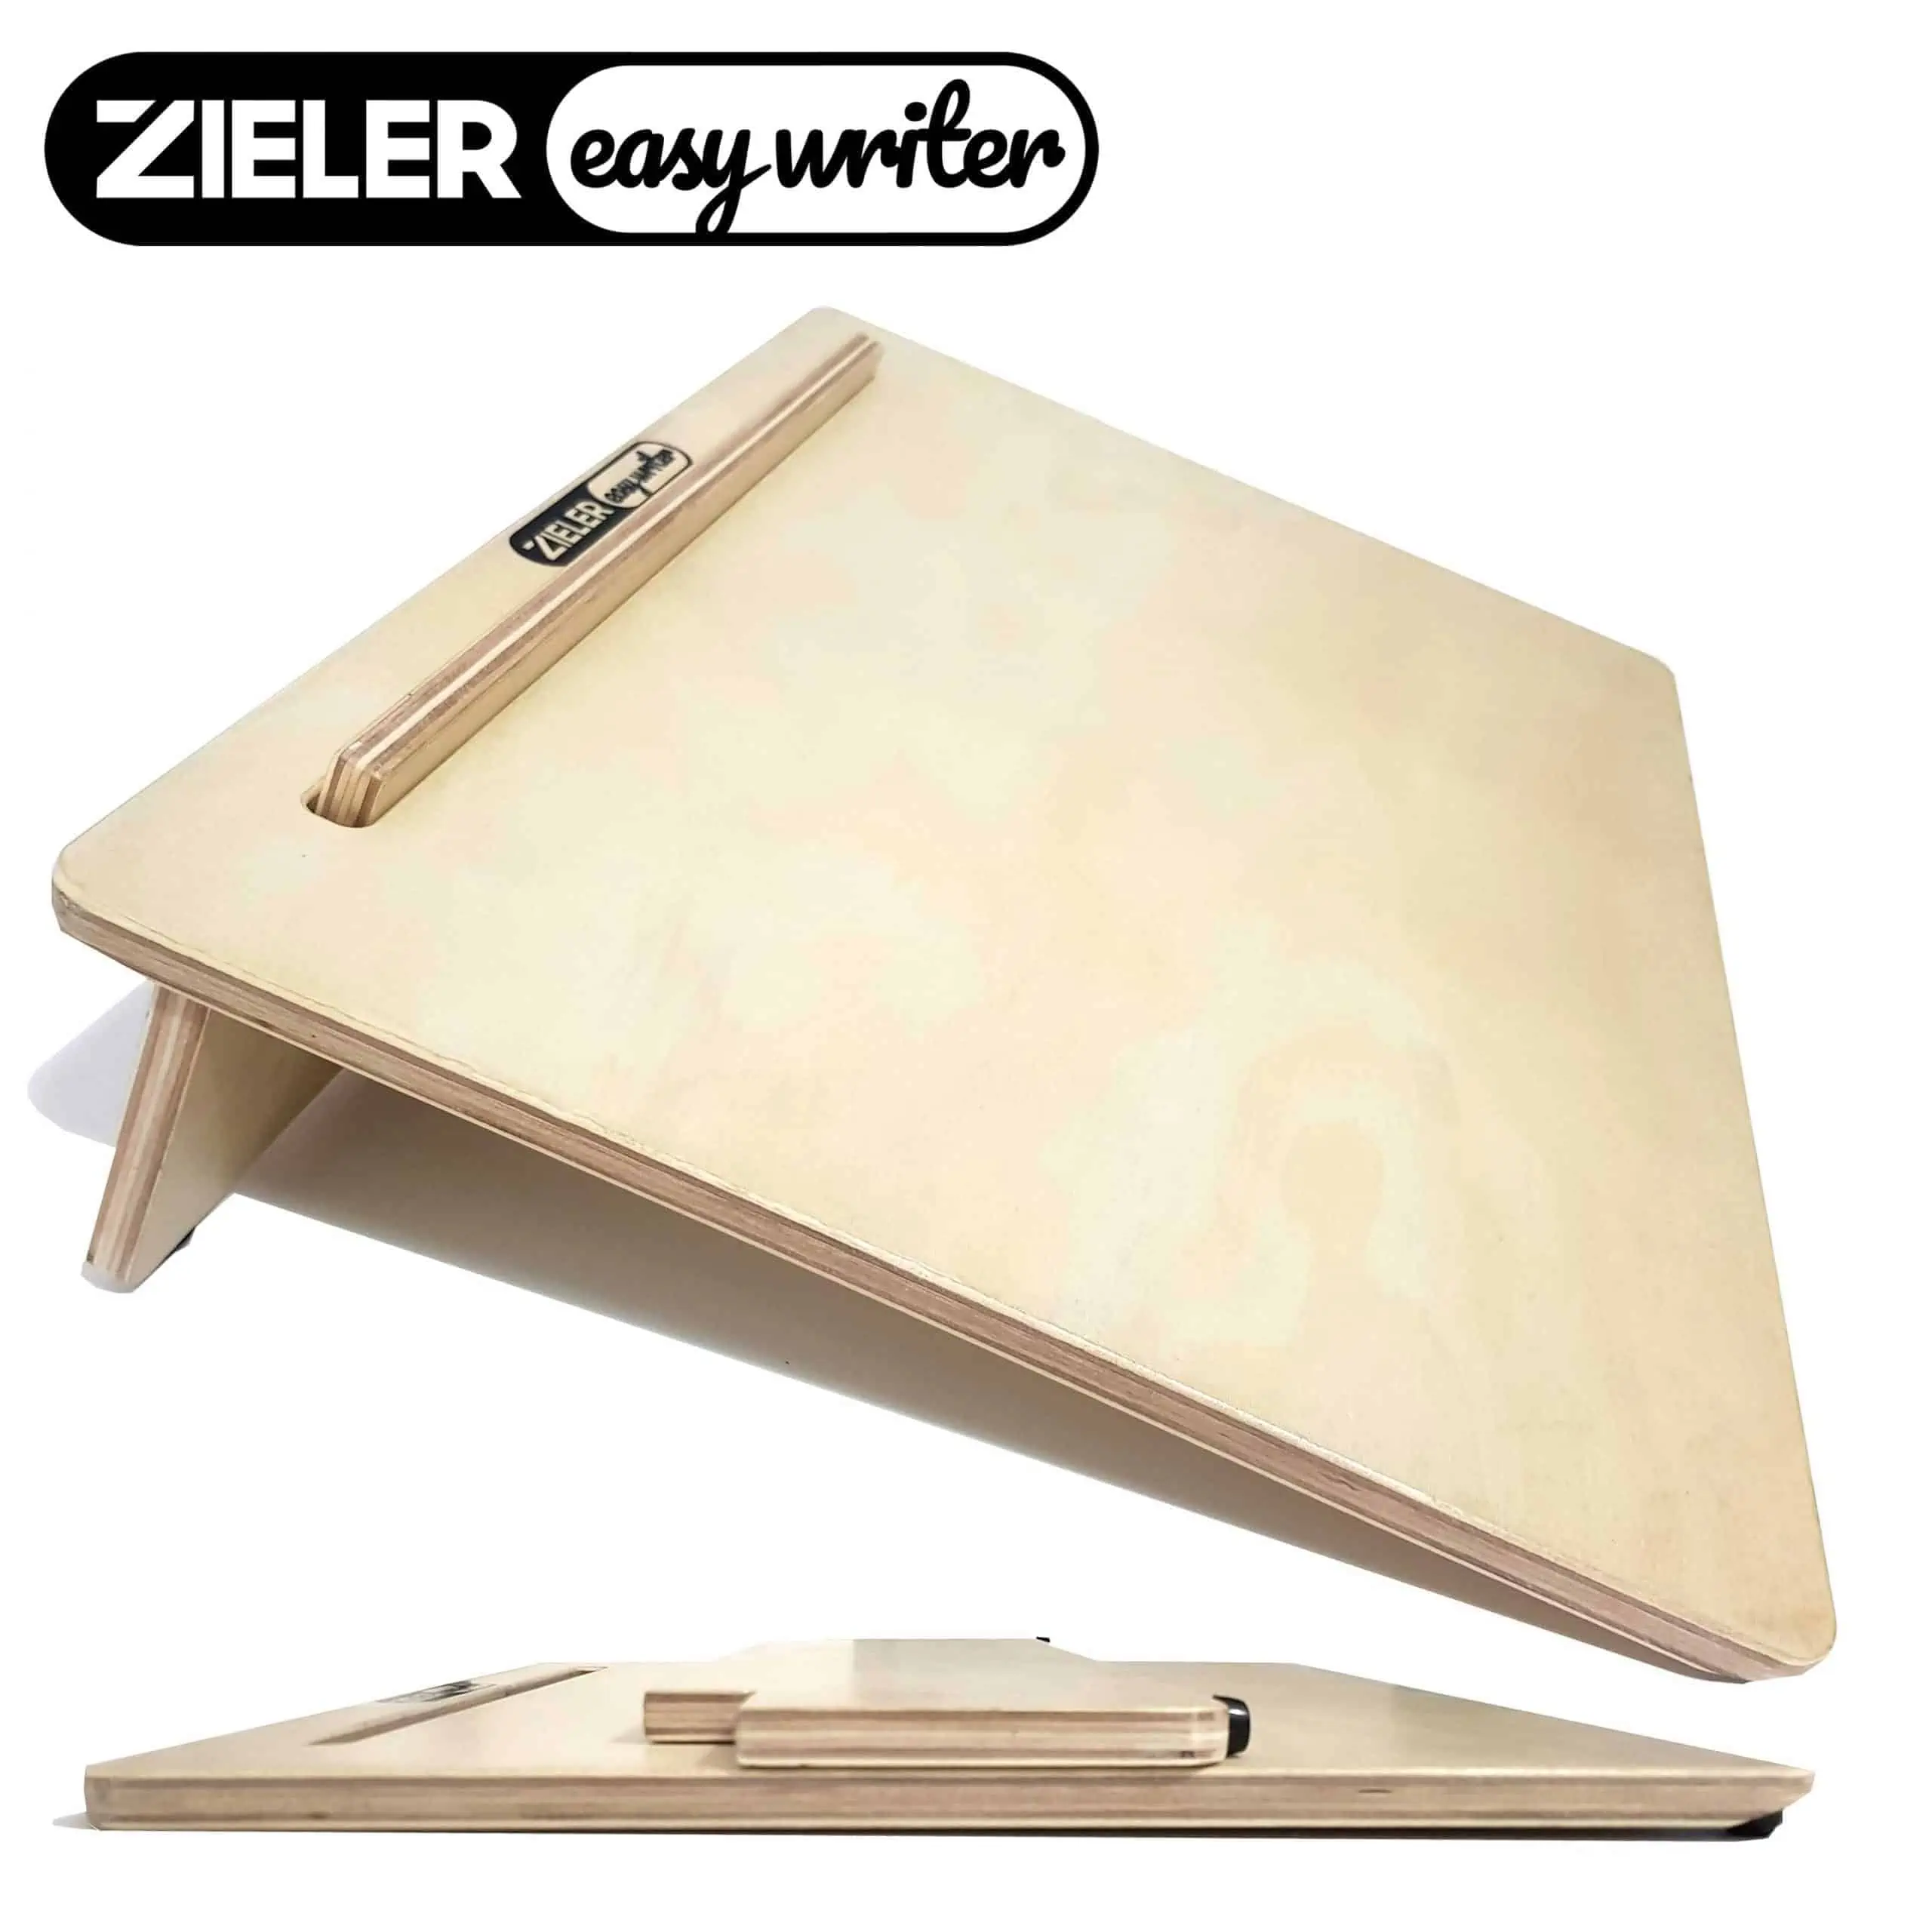 Large (A3) Wooden Ergonomic Writing Slope - By Zieler Easywriter